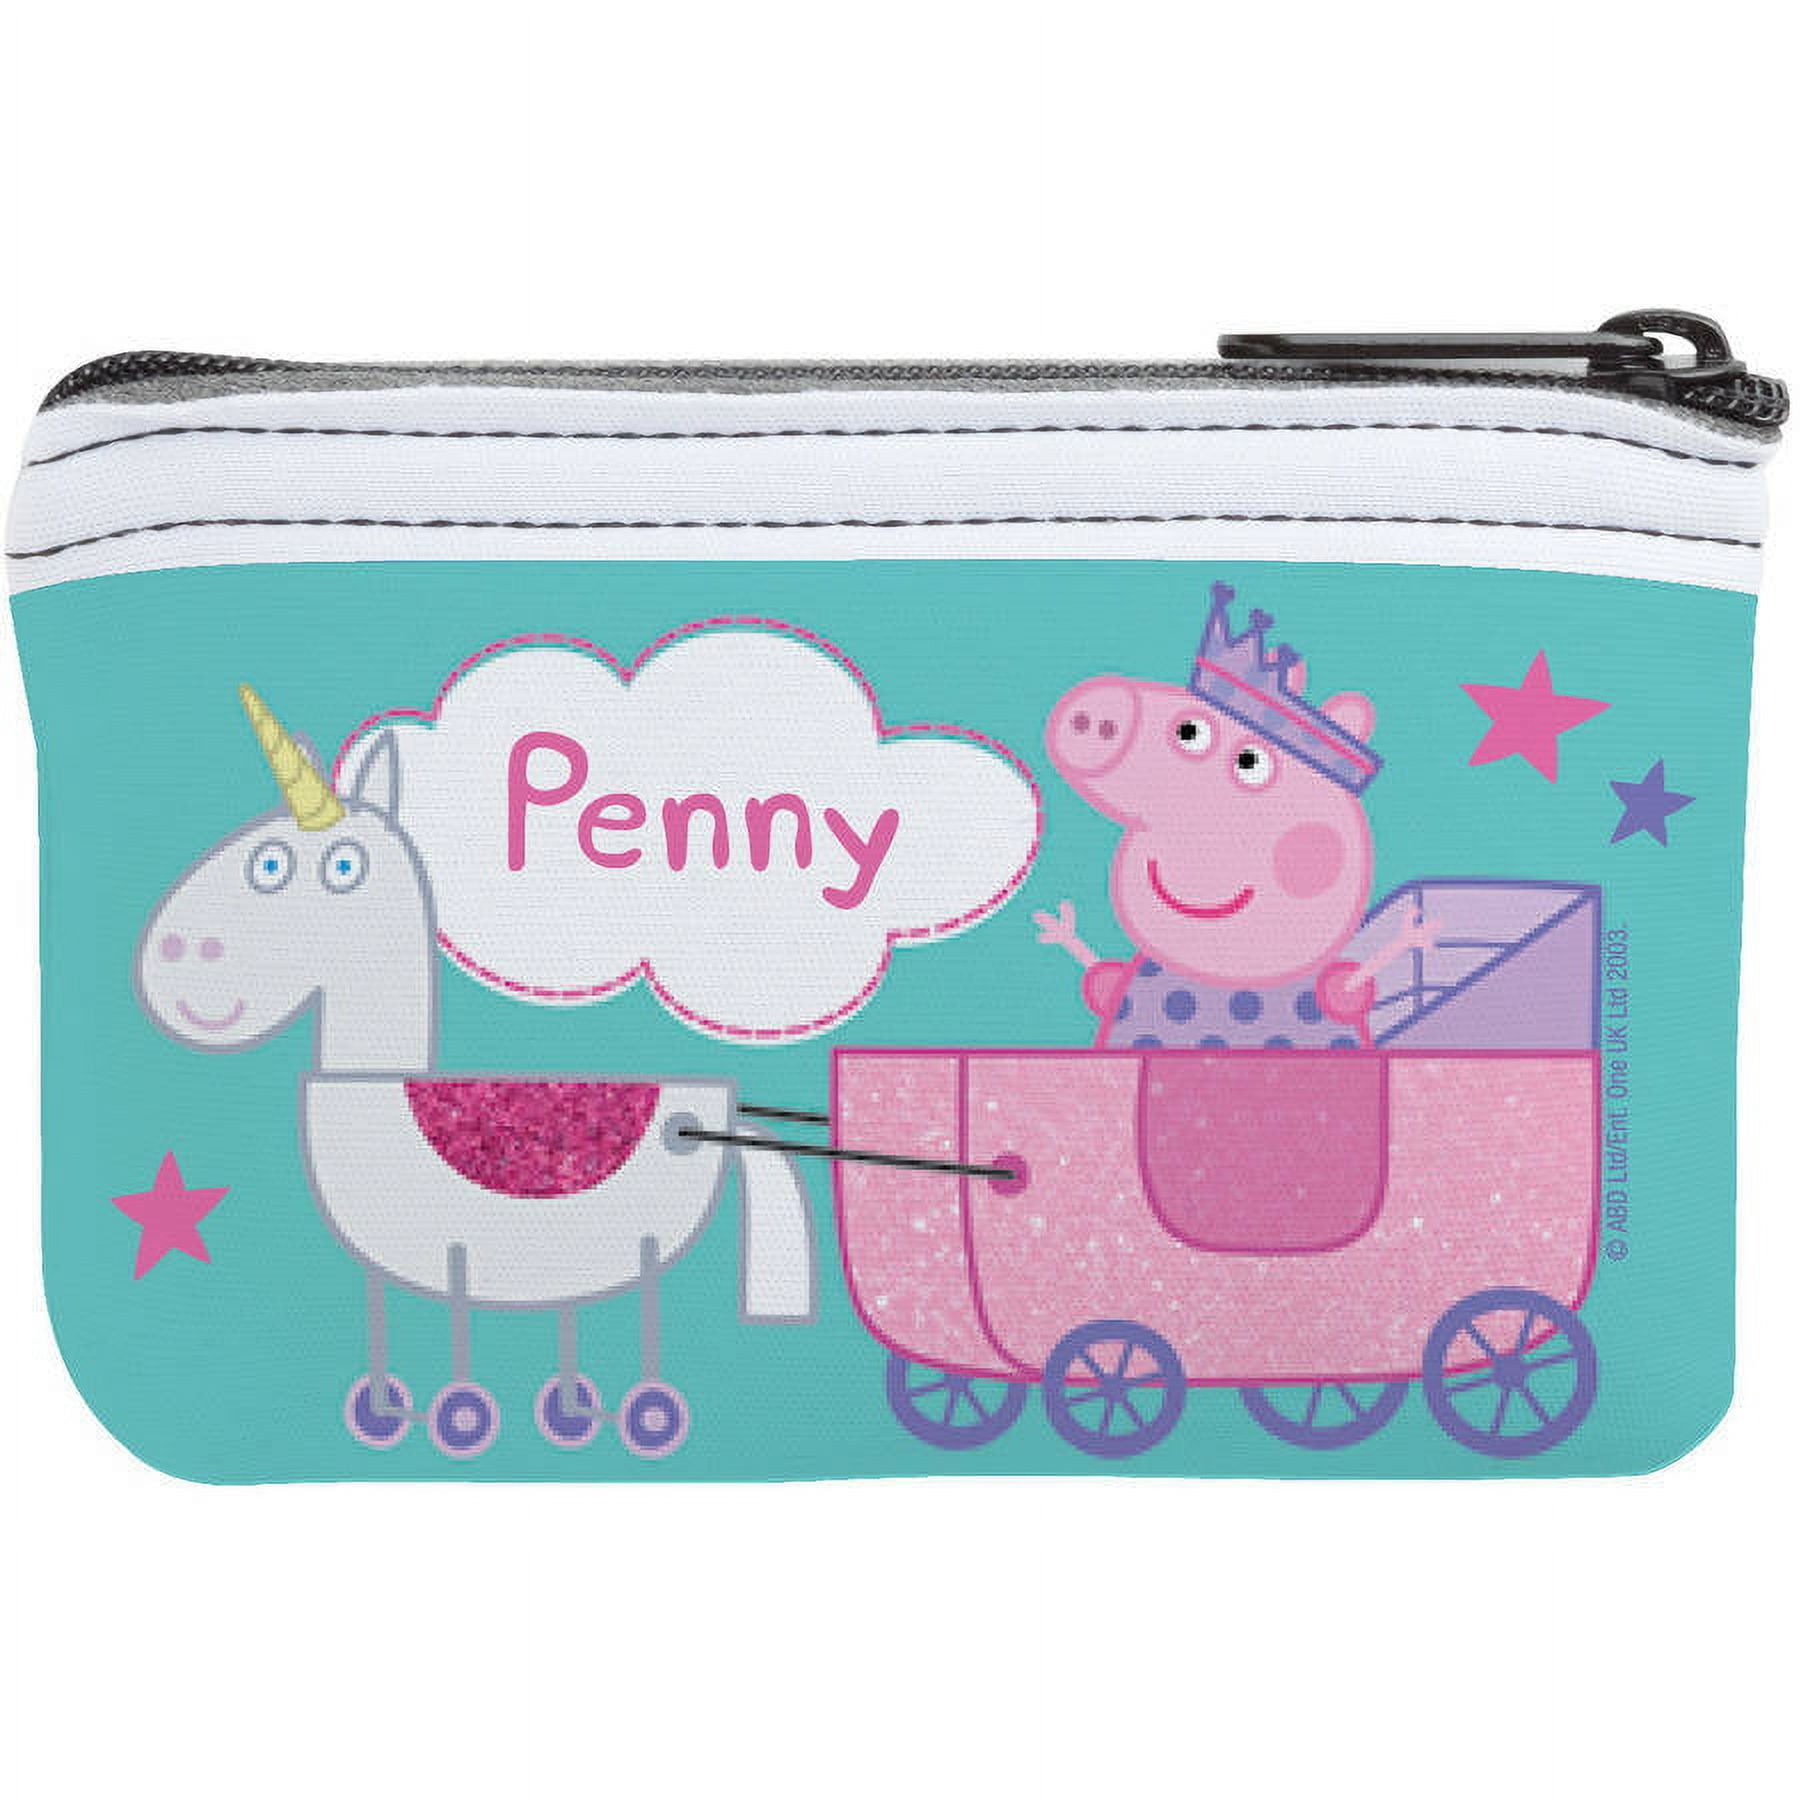 Fun To Learn Peppa Pig Bag Of Fun Magazine - Compare Prices & Where To Buy  - Trolley.co.uk